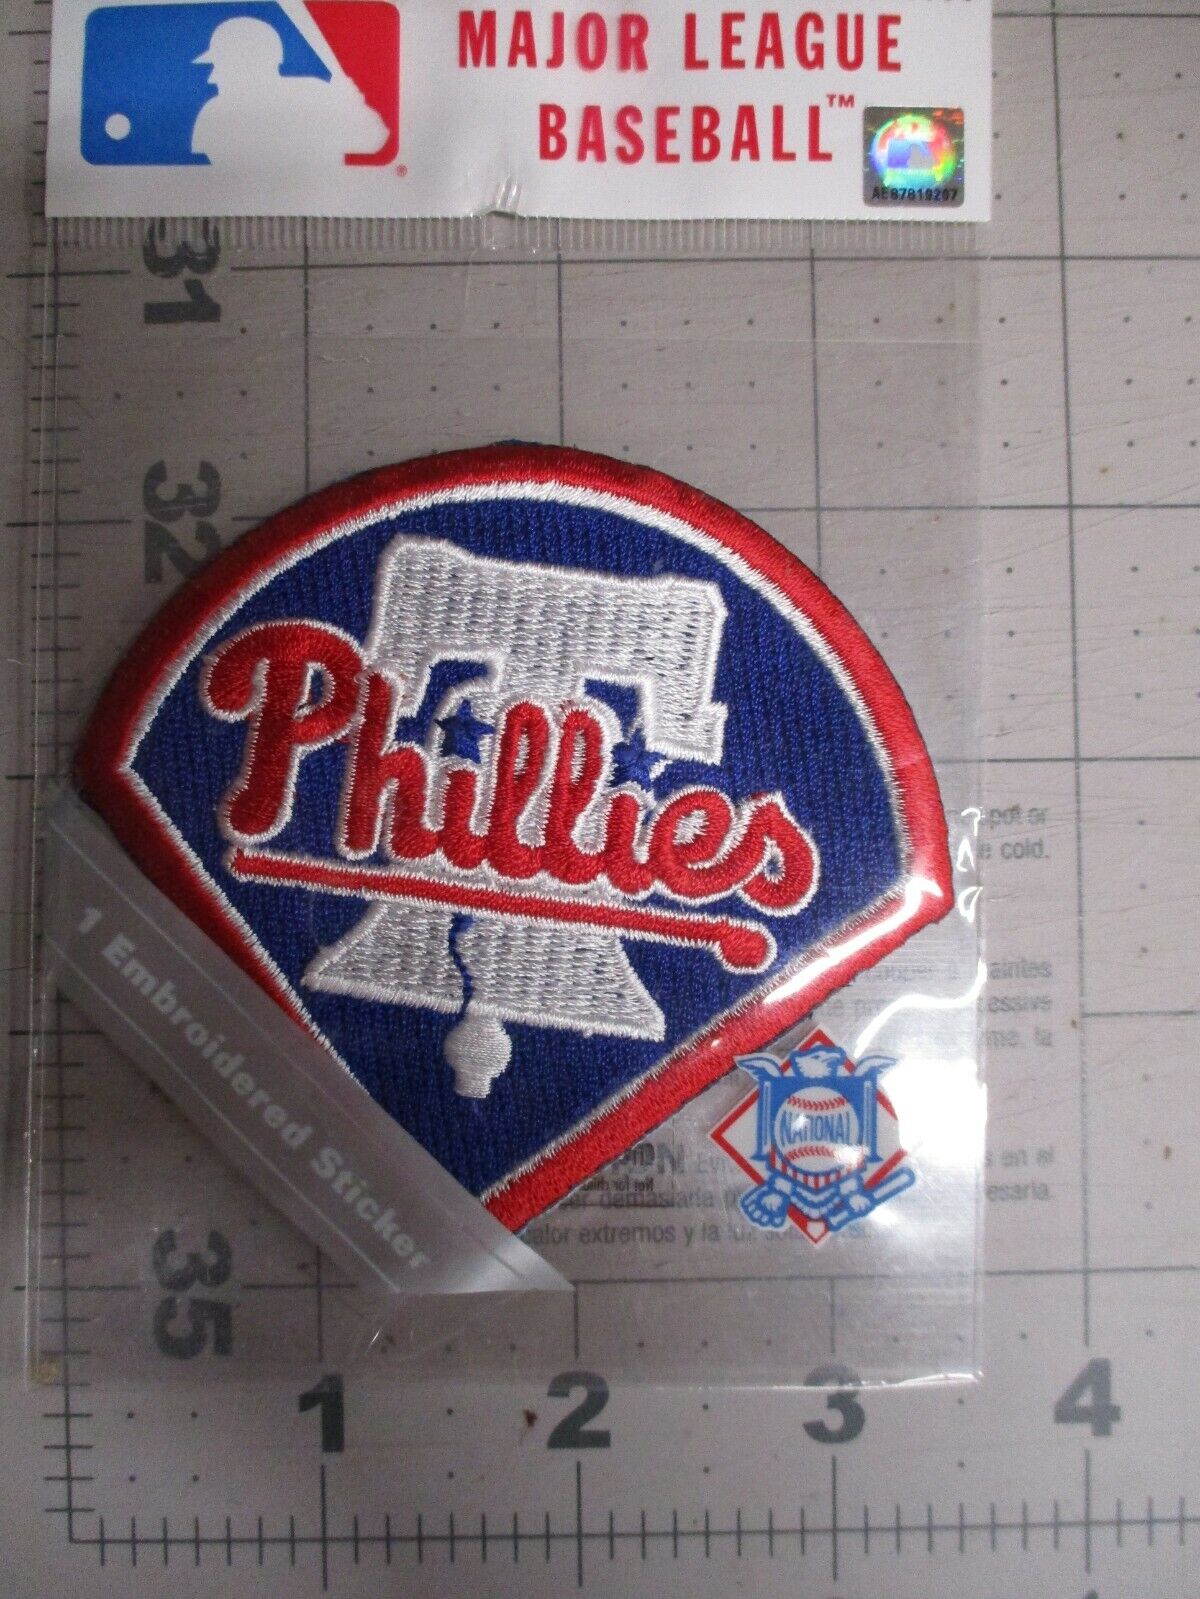 Philadelphia Phillies patch size 3.25 x 3.25 inches in excellent condition